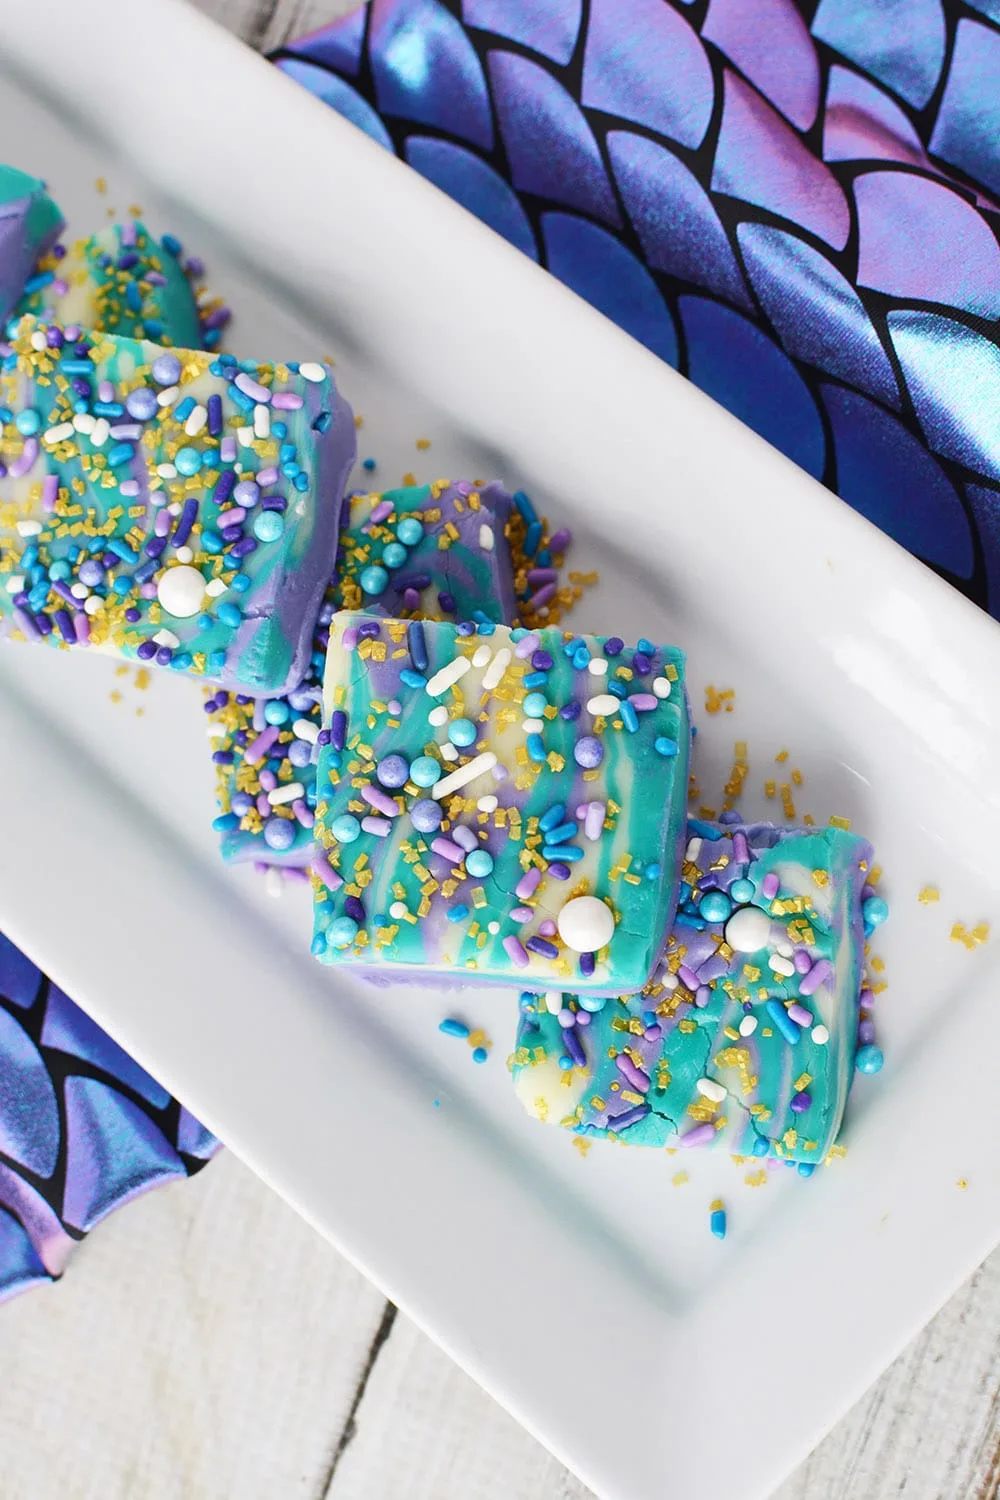 Mermaid candy fudge sliced on a serving platter.